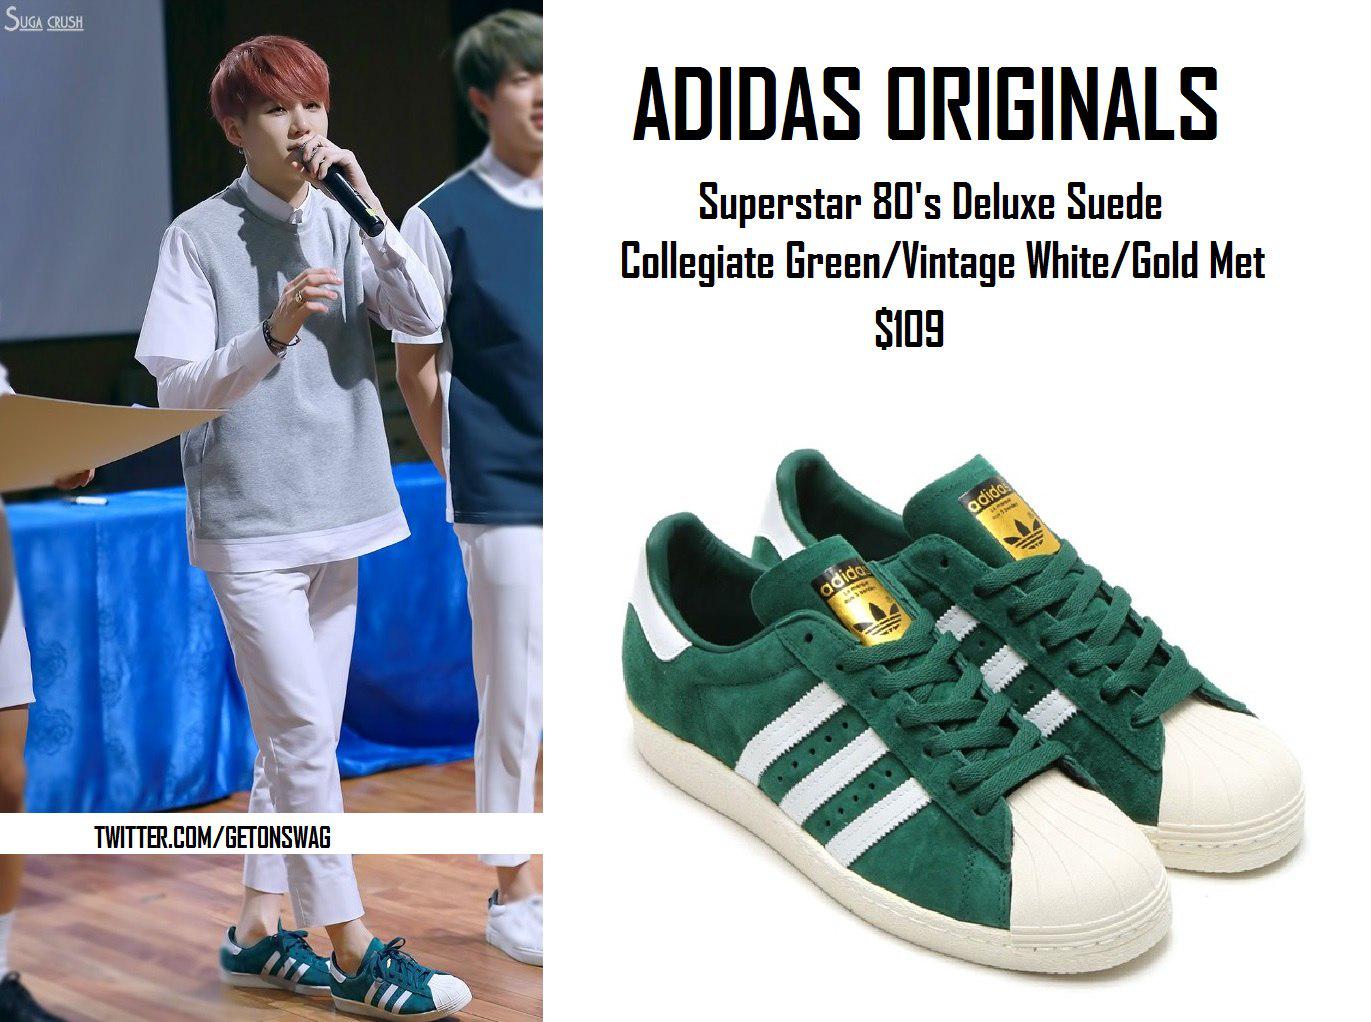 The Style ✼ Alex ✼ Twitter: "Suga #BTS shoespam Adidas Originals in collegiate green @SUGA_NATION @BTS_twt http://t.co/4ZCUYPyWYT" / Twitter